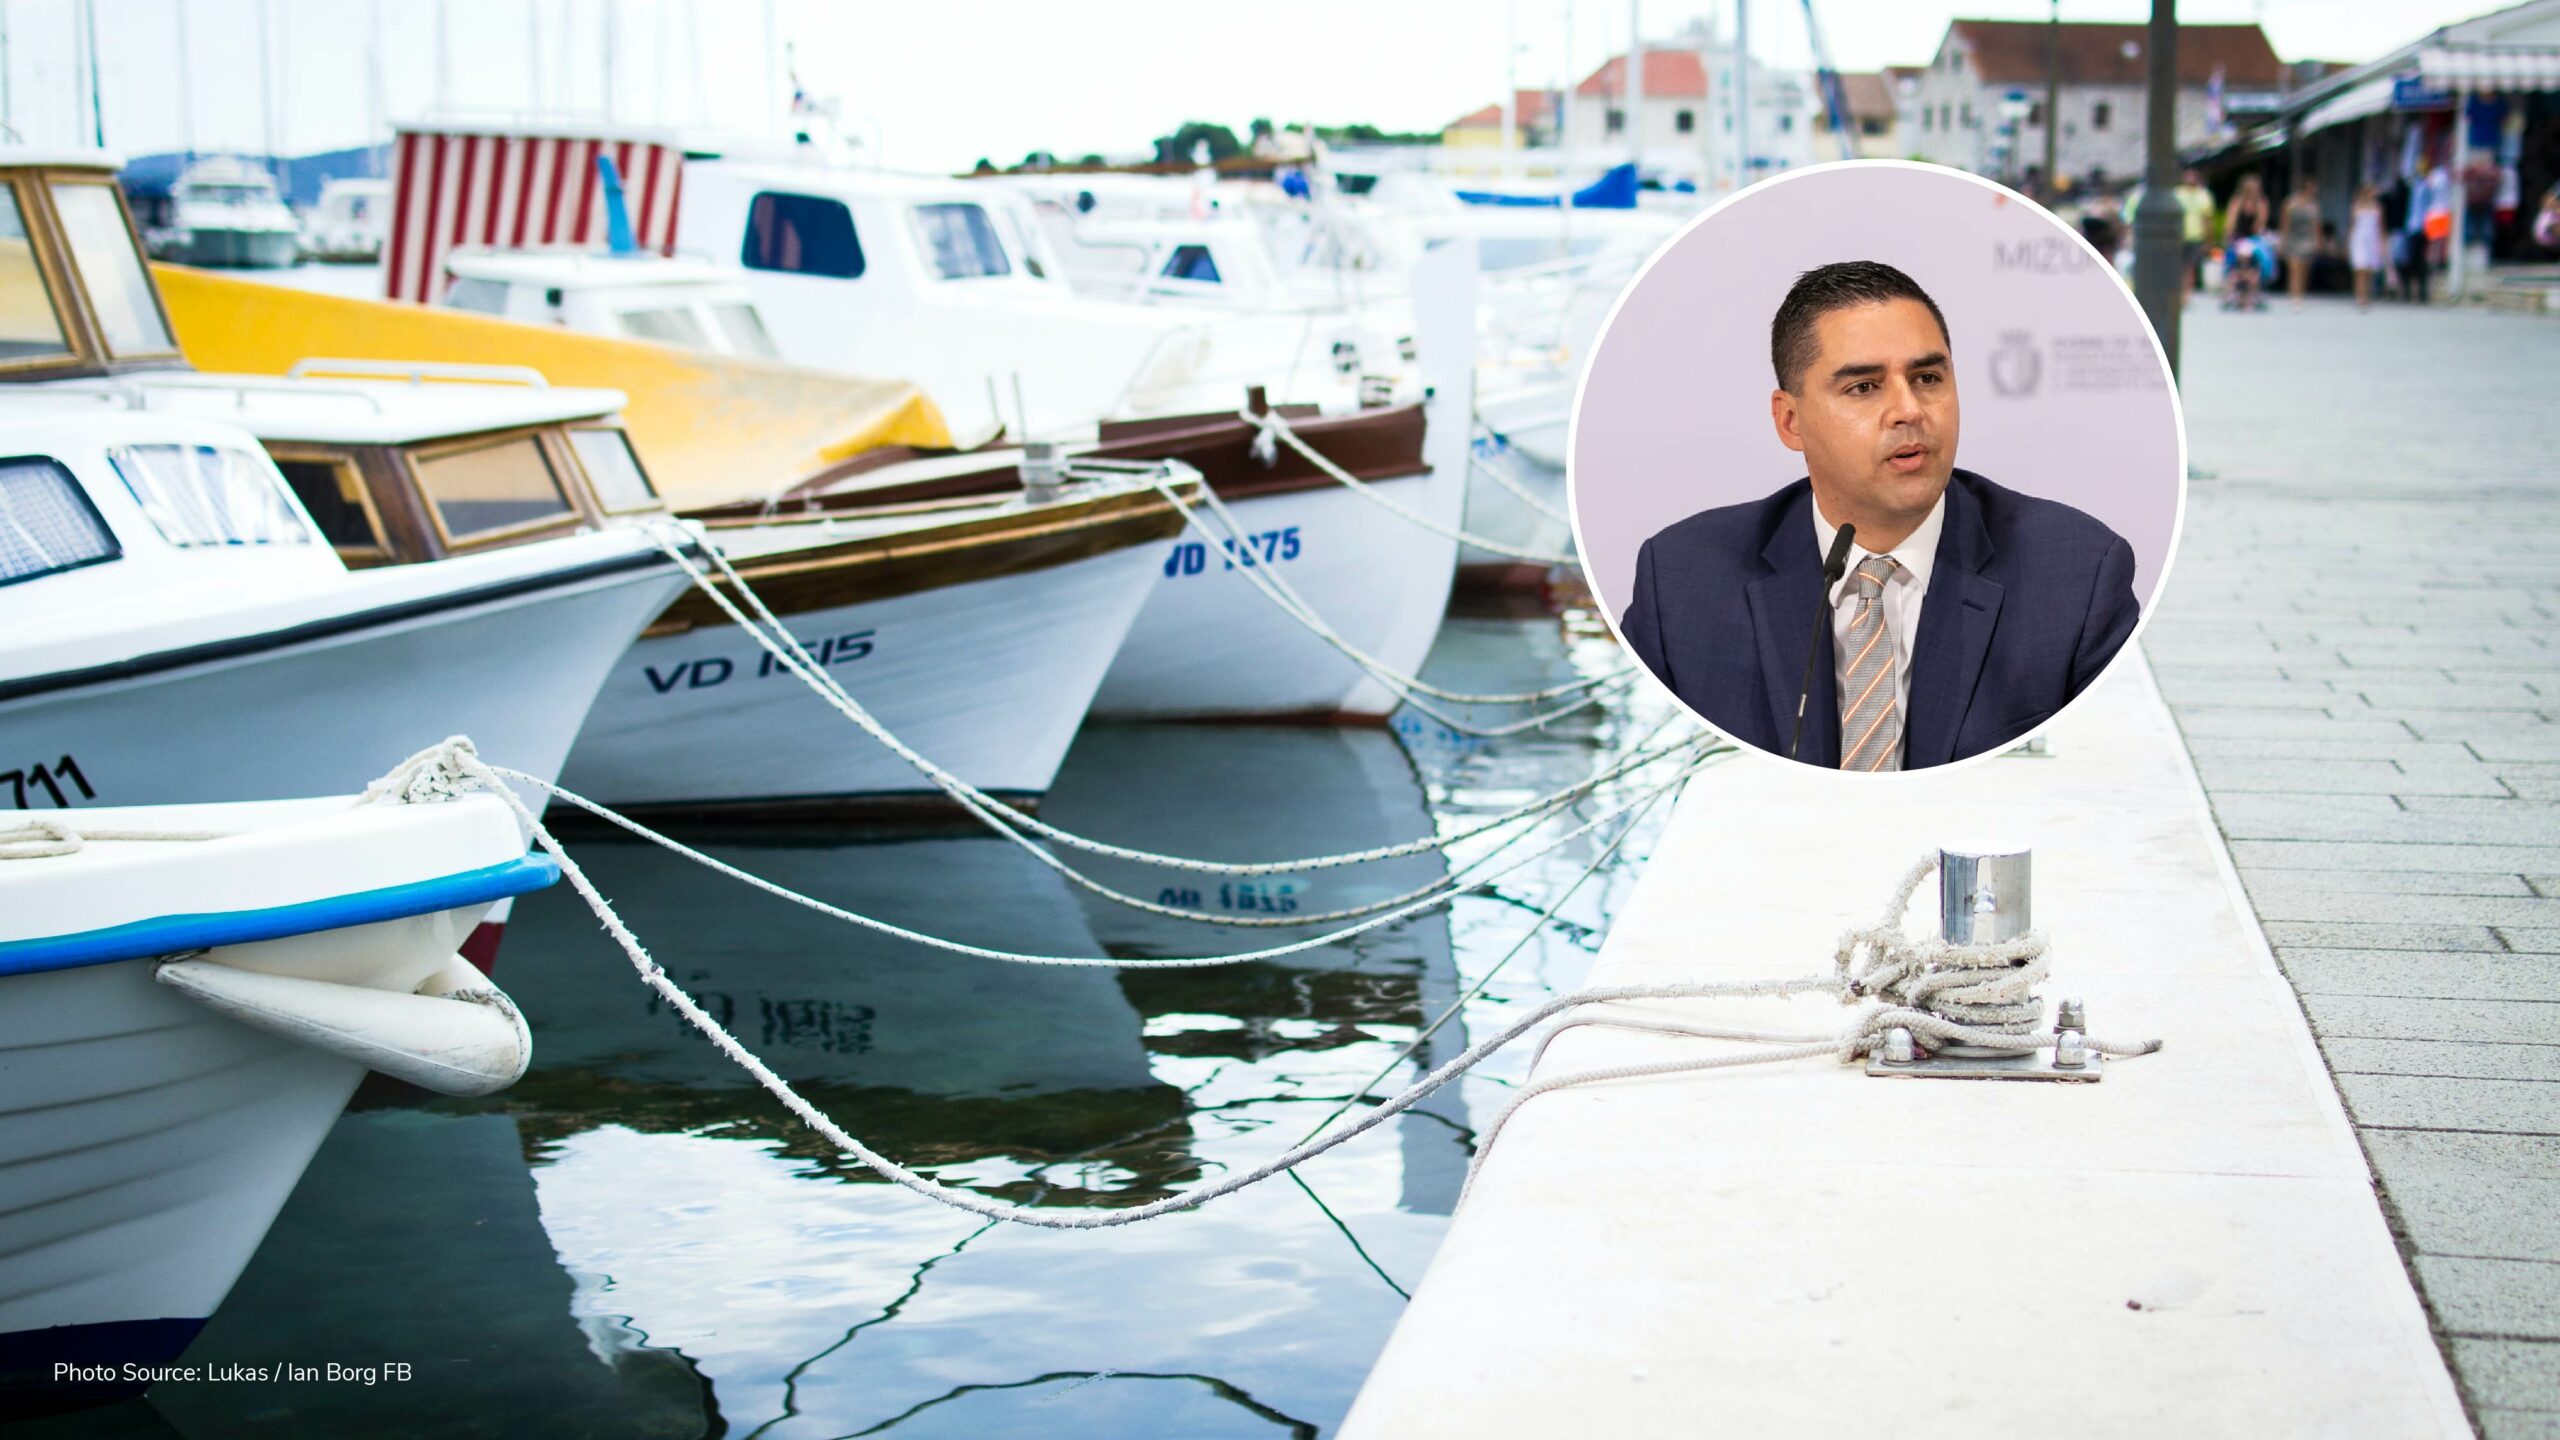 22,650 boats are currently registered in Malta